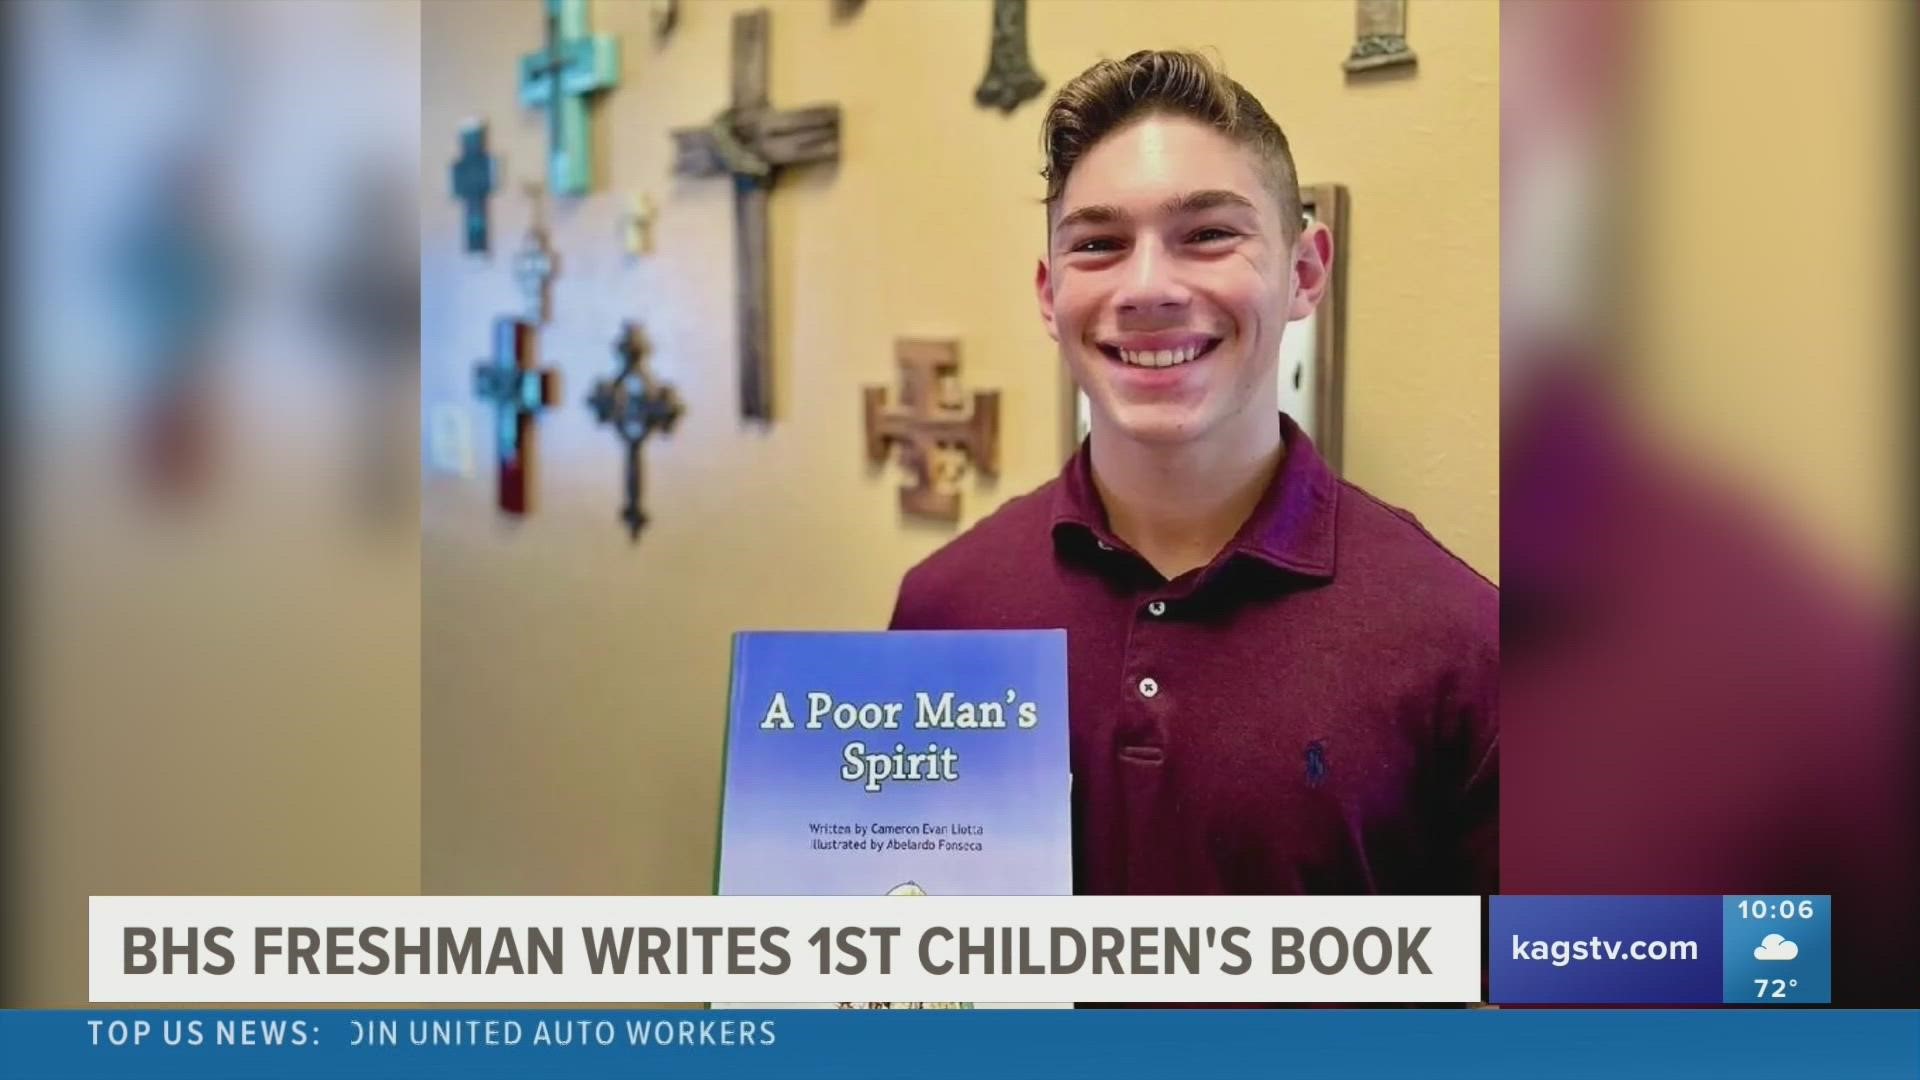 Cameron Liotta wrote and published what he says is the perfect book for the holiday.